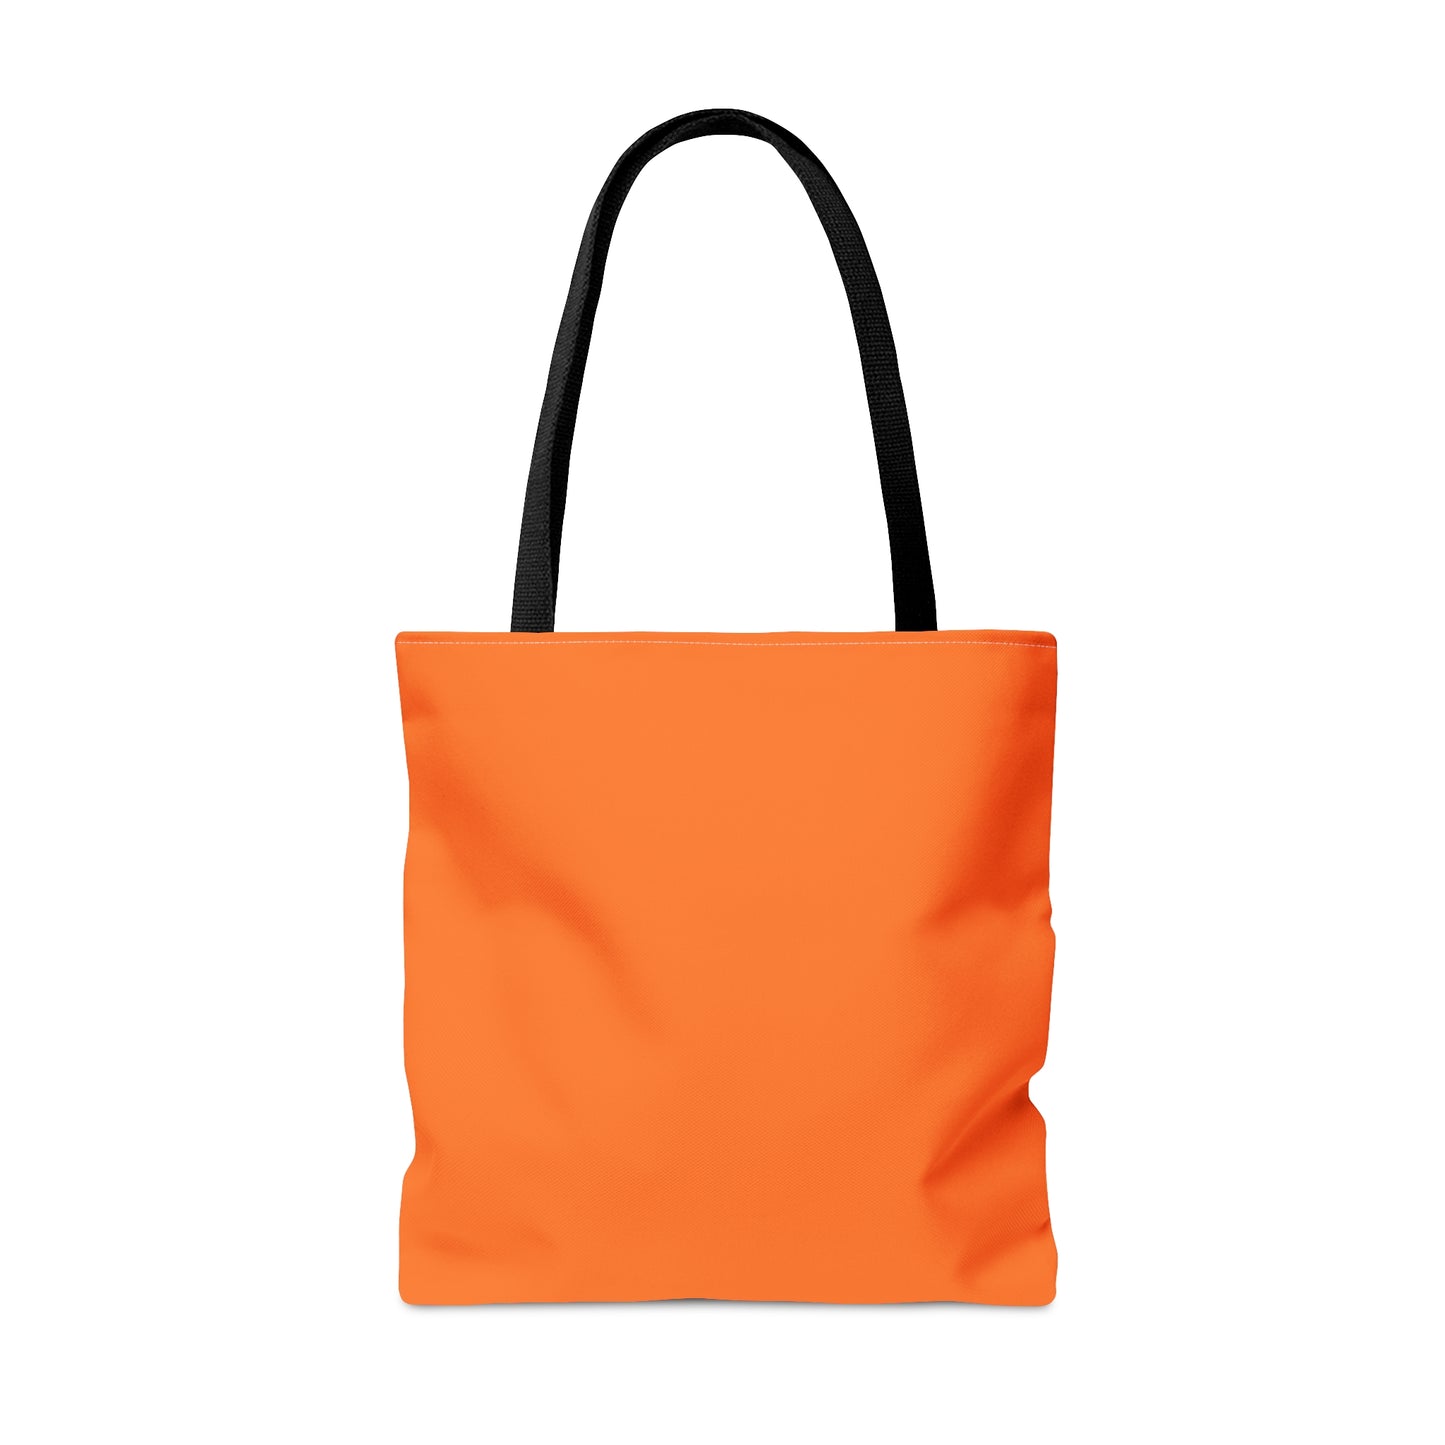 Truth Goodness Beauty Tote Bag